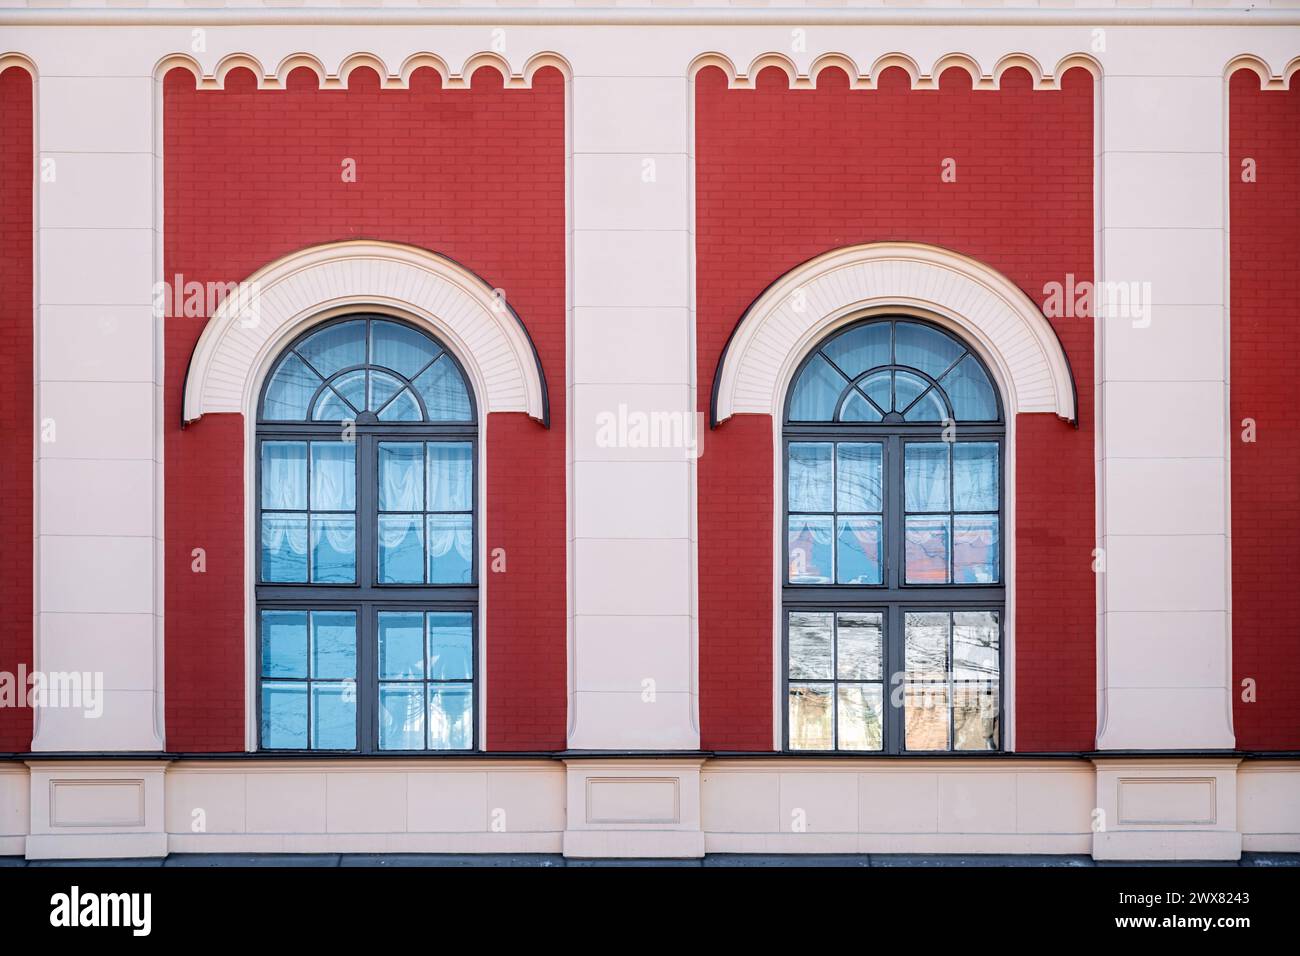 Two arched windows with gray frames against a red brick wall with columns. From the series Window of the World. Stock Photo